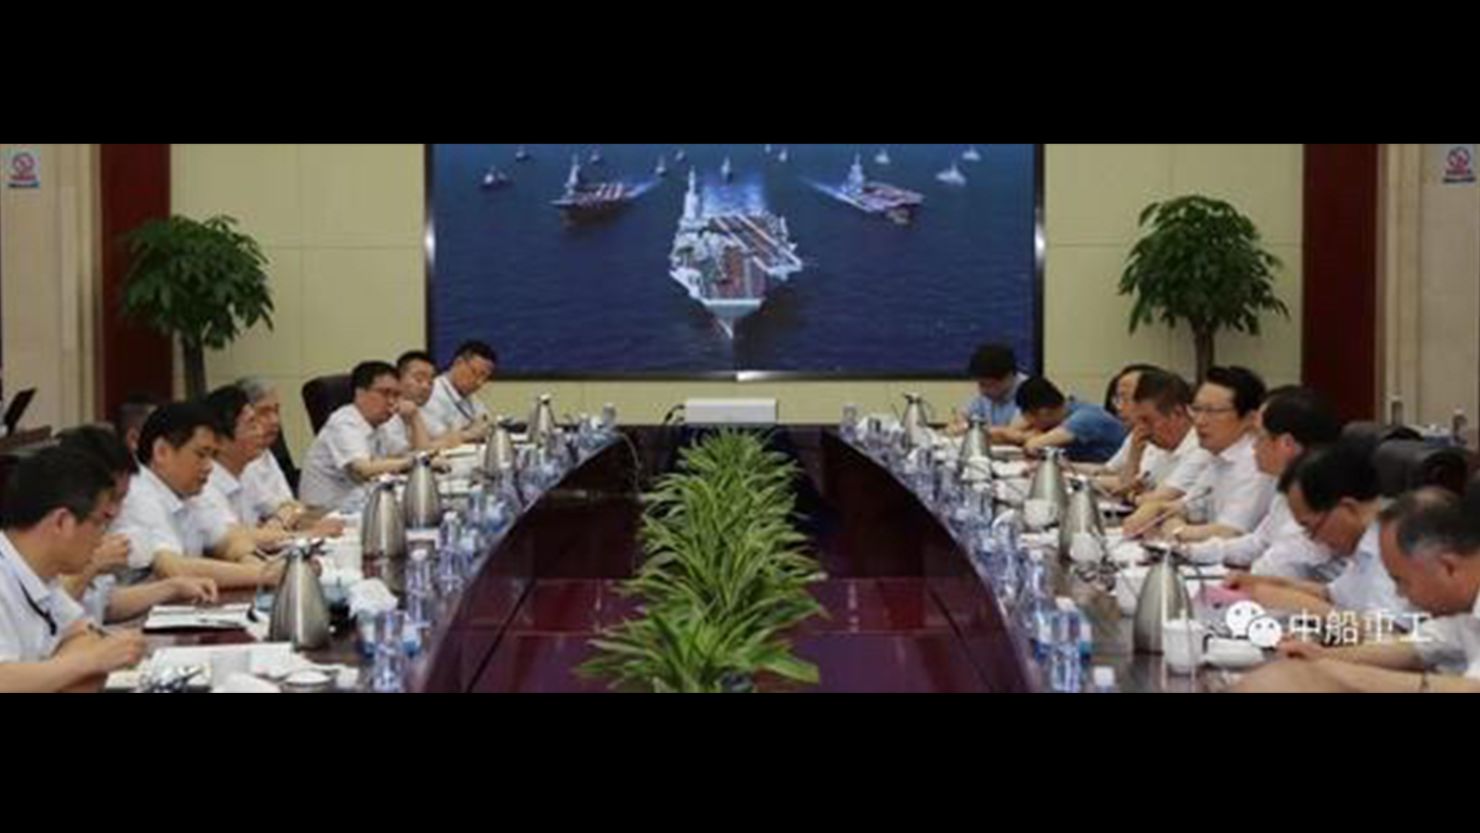 Screen shot from Chinese media shows a conference at the No.701 Research Institute of China Shipbuilding Industry Corporation with picture in the background of China's two current ski-jump carriers flanking a larger ship with a flat deck thought to picture what China's third aircraft carrier will look like.